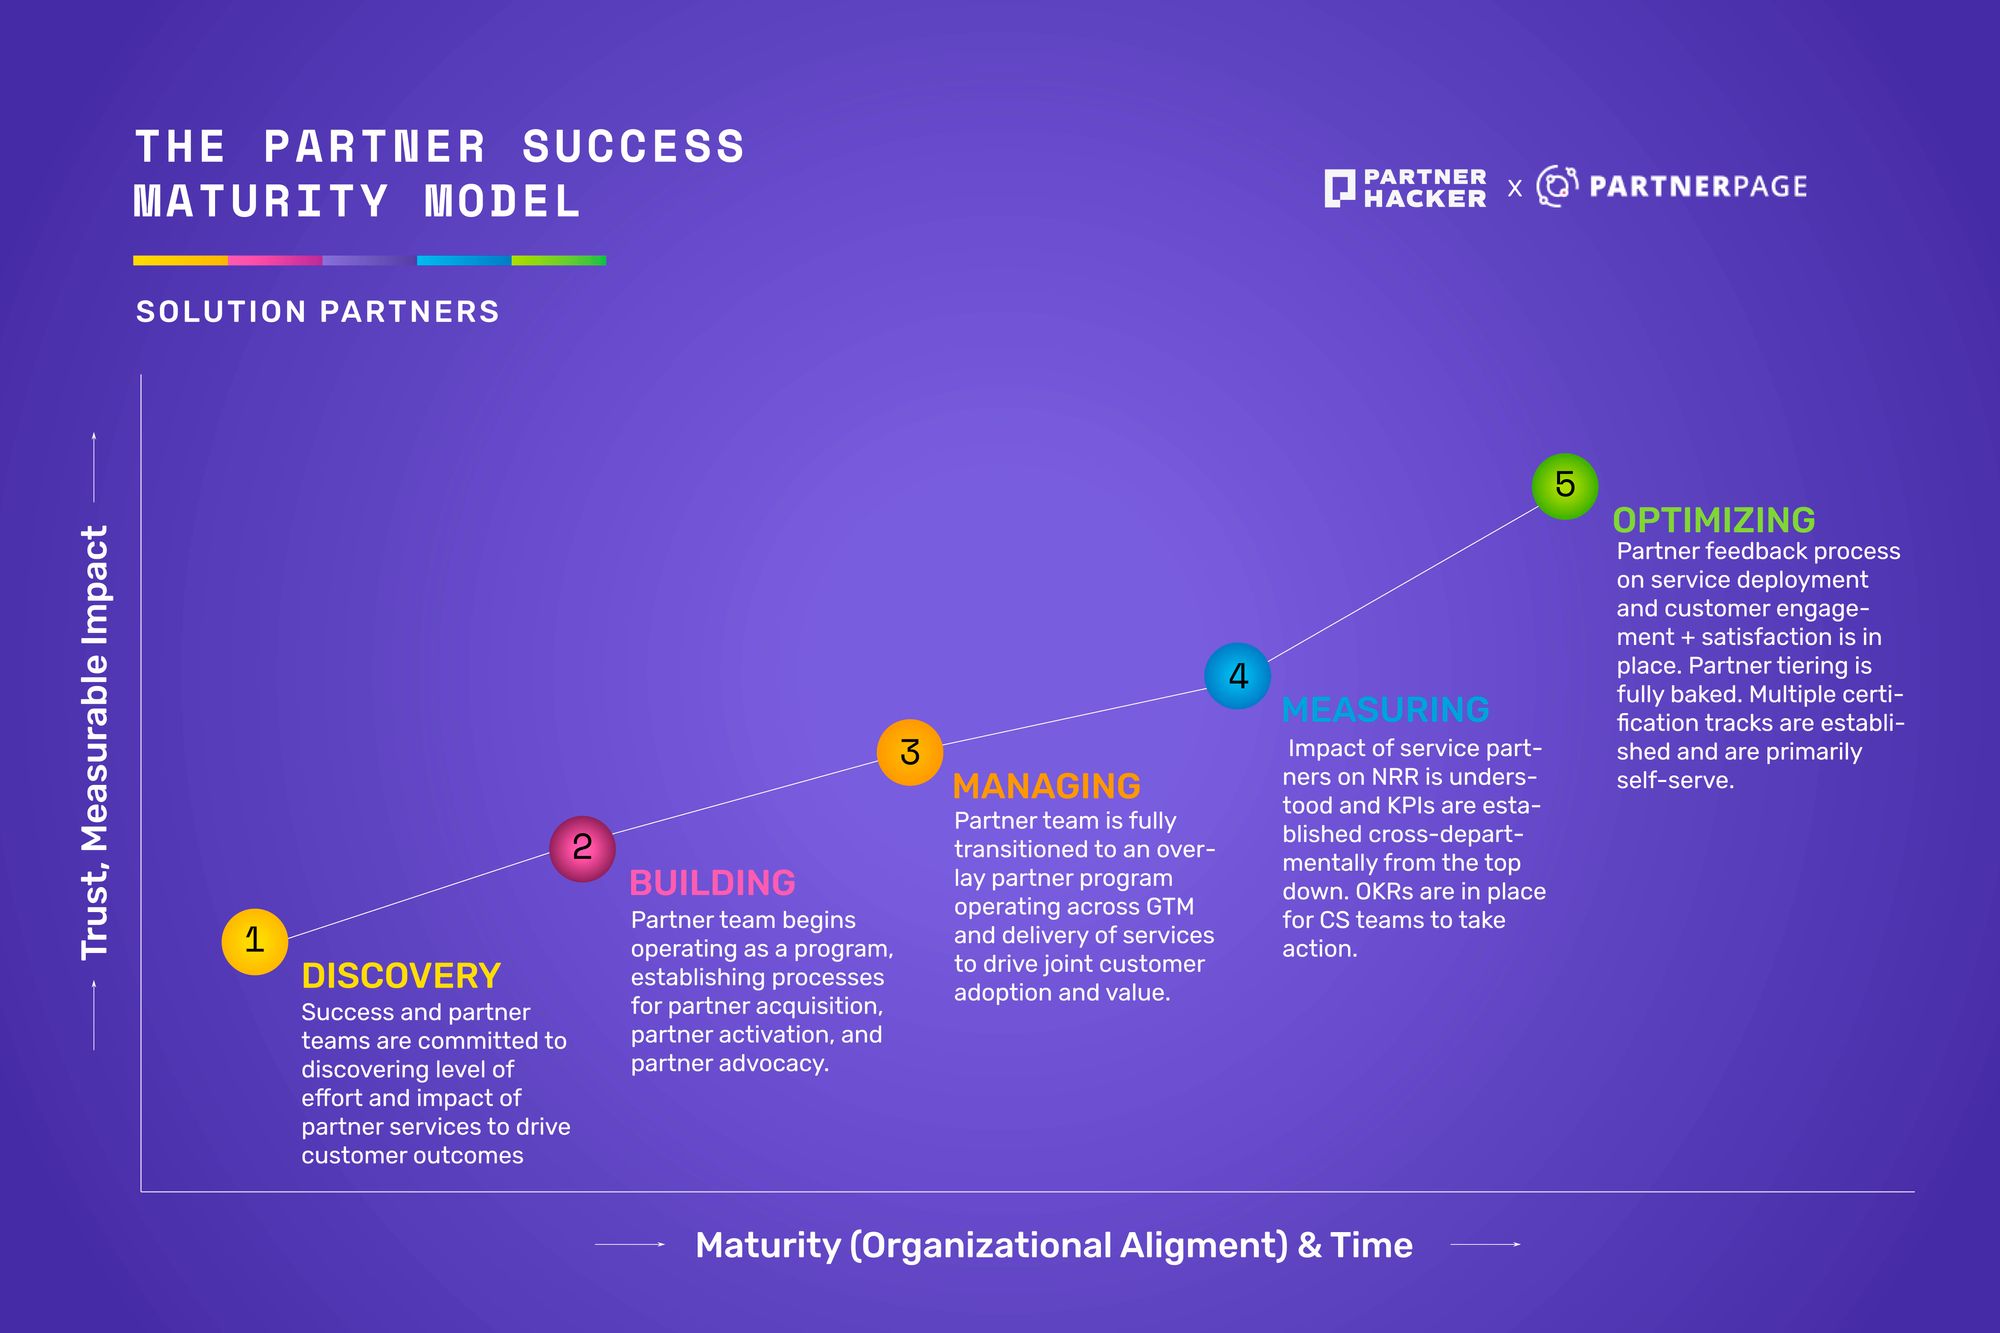 The Partner Success Maturity Model for solutions partners